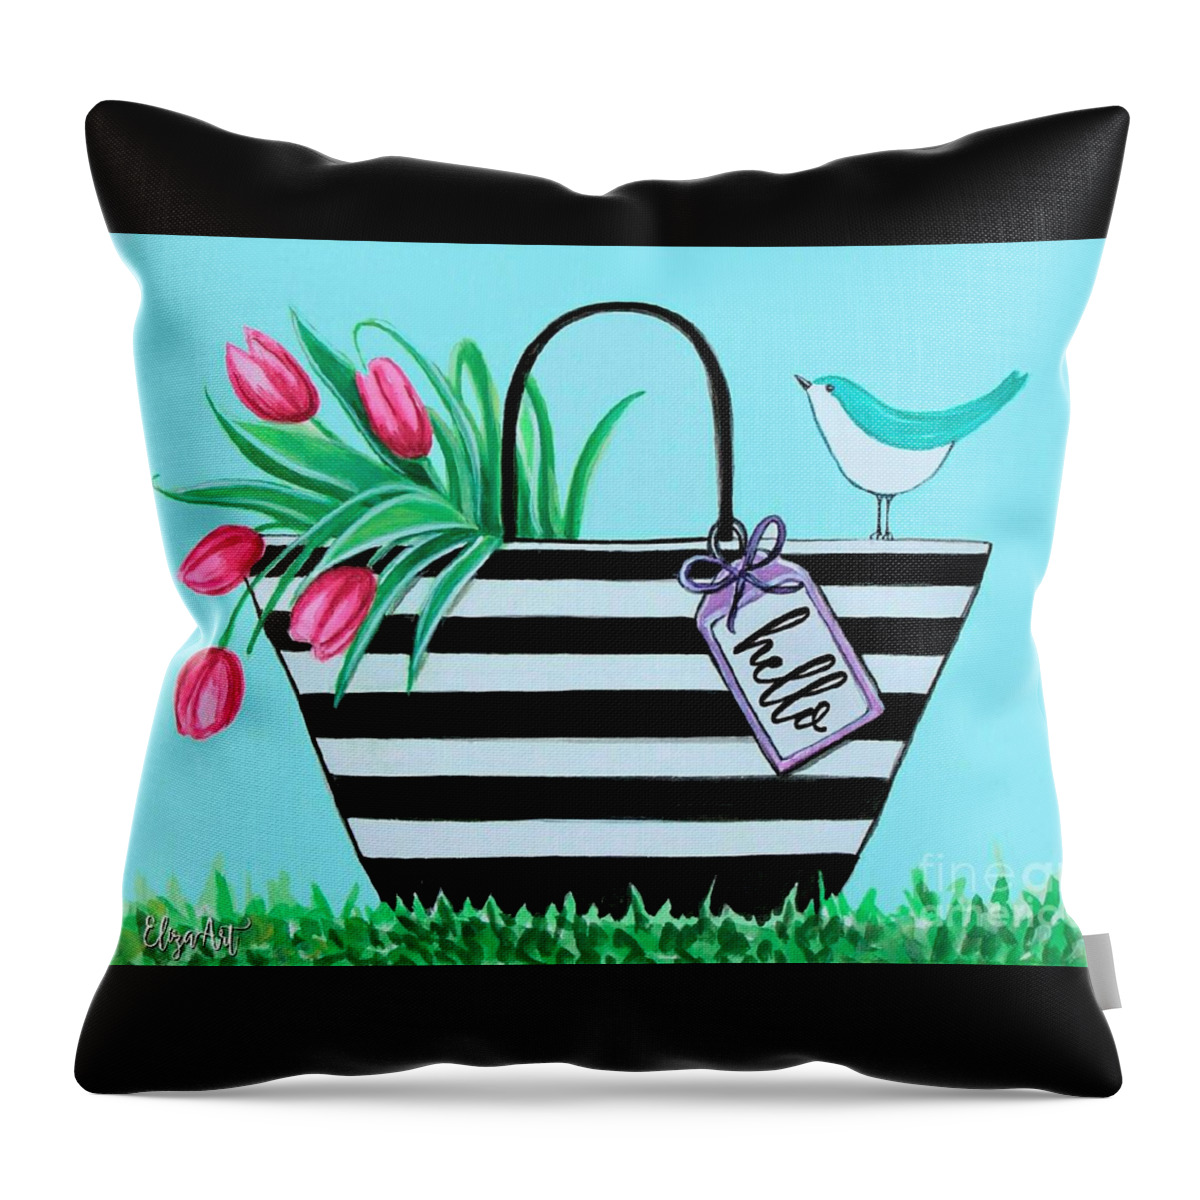 Hello Throw Pillow featuring the painting Hello by Elizabeth Robinette Tyndall